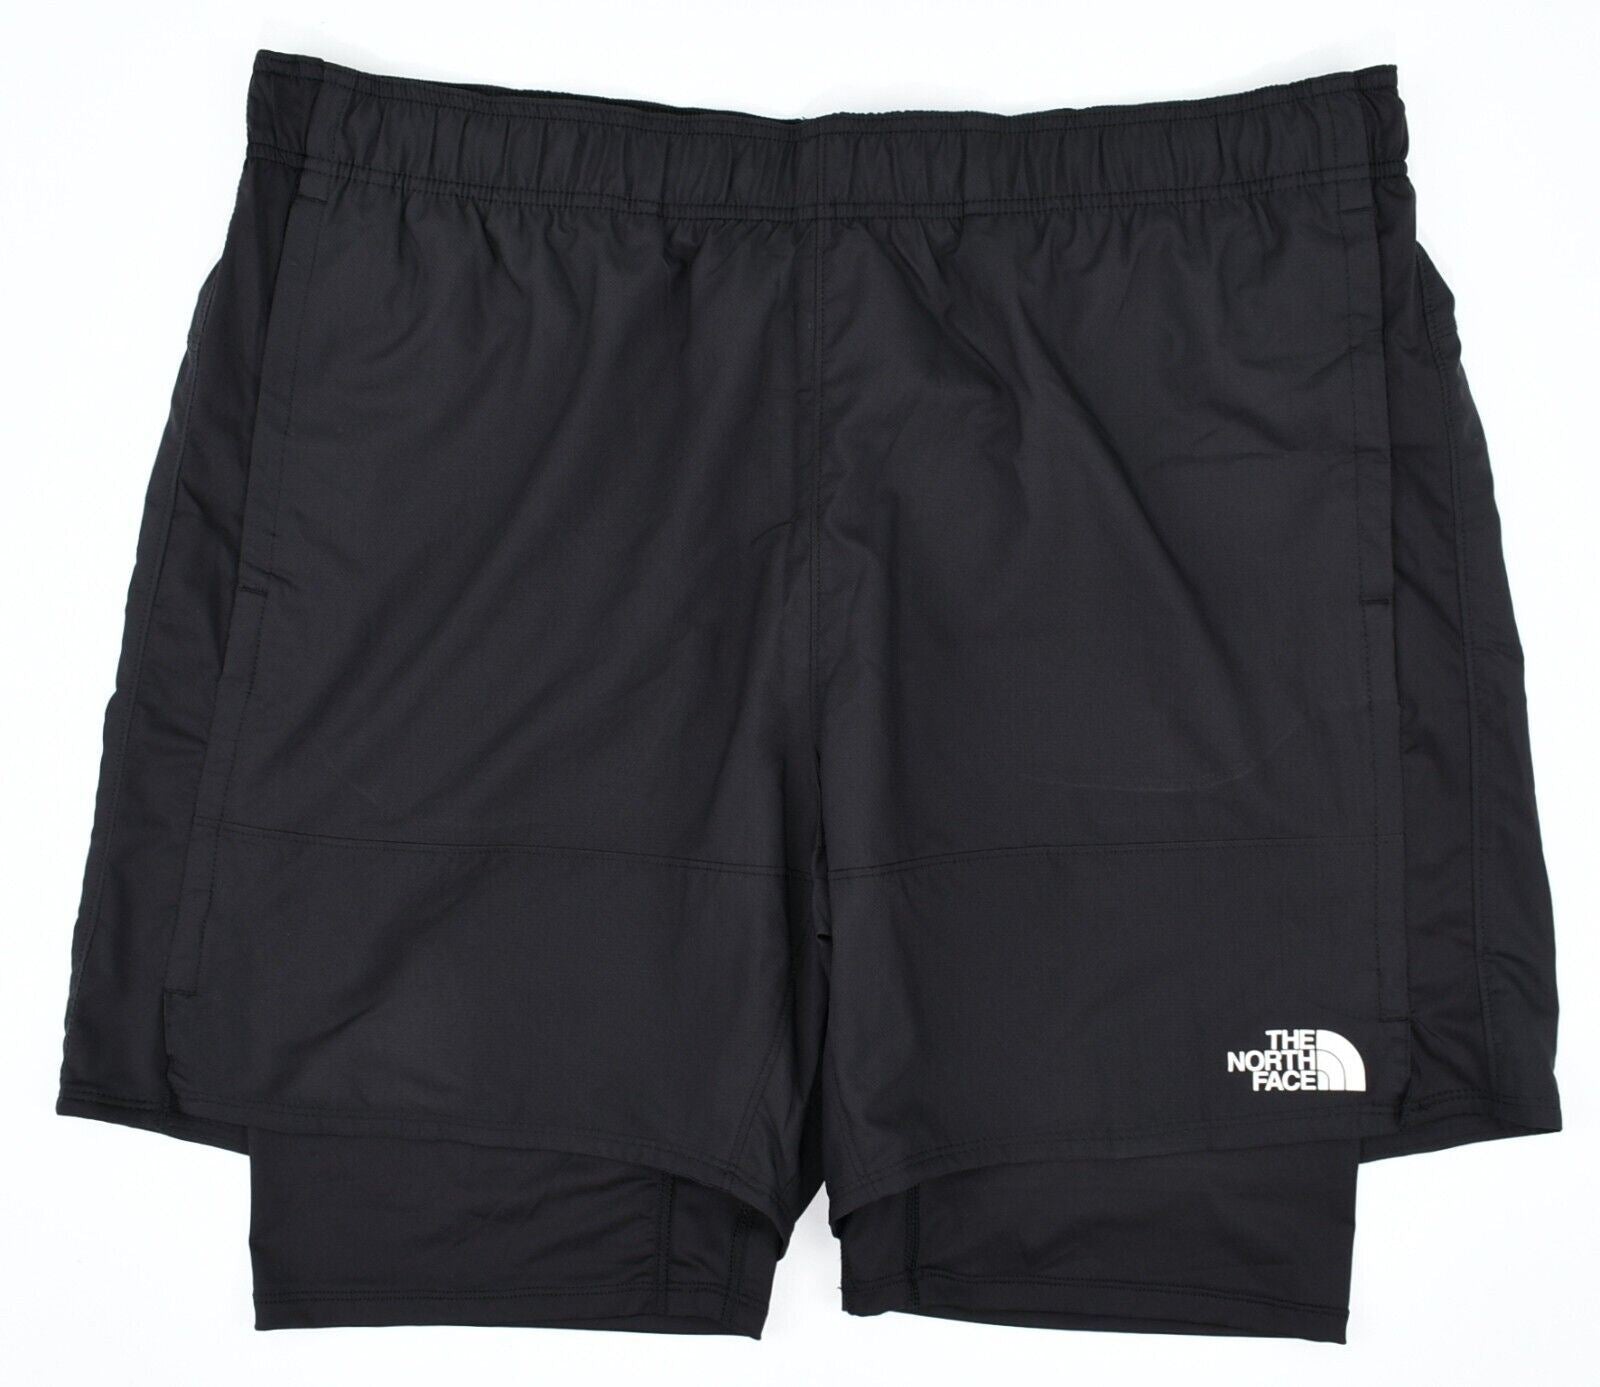 THE NORTH FACE Men's 2-in-1 Active Trail Dual Shorts, Black, size XL